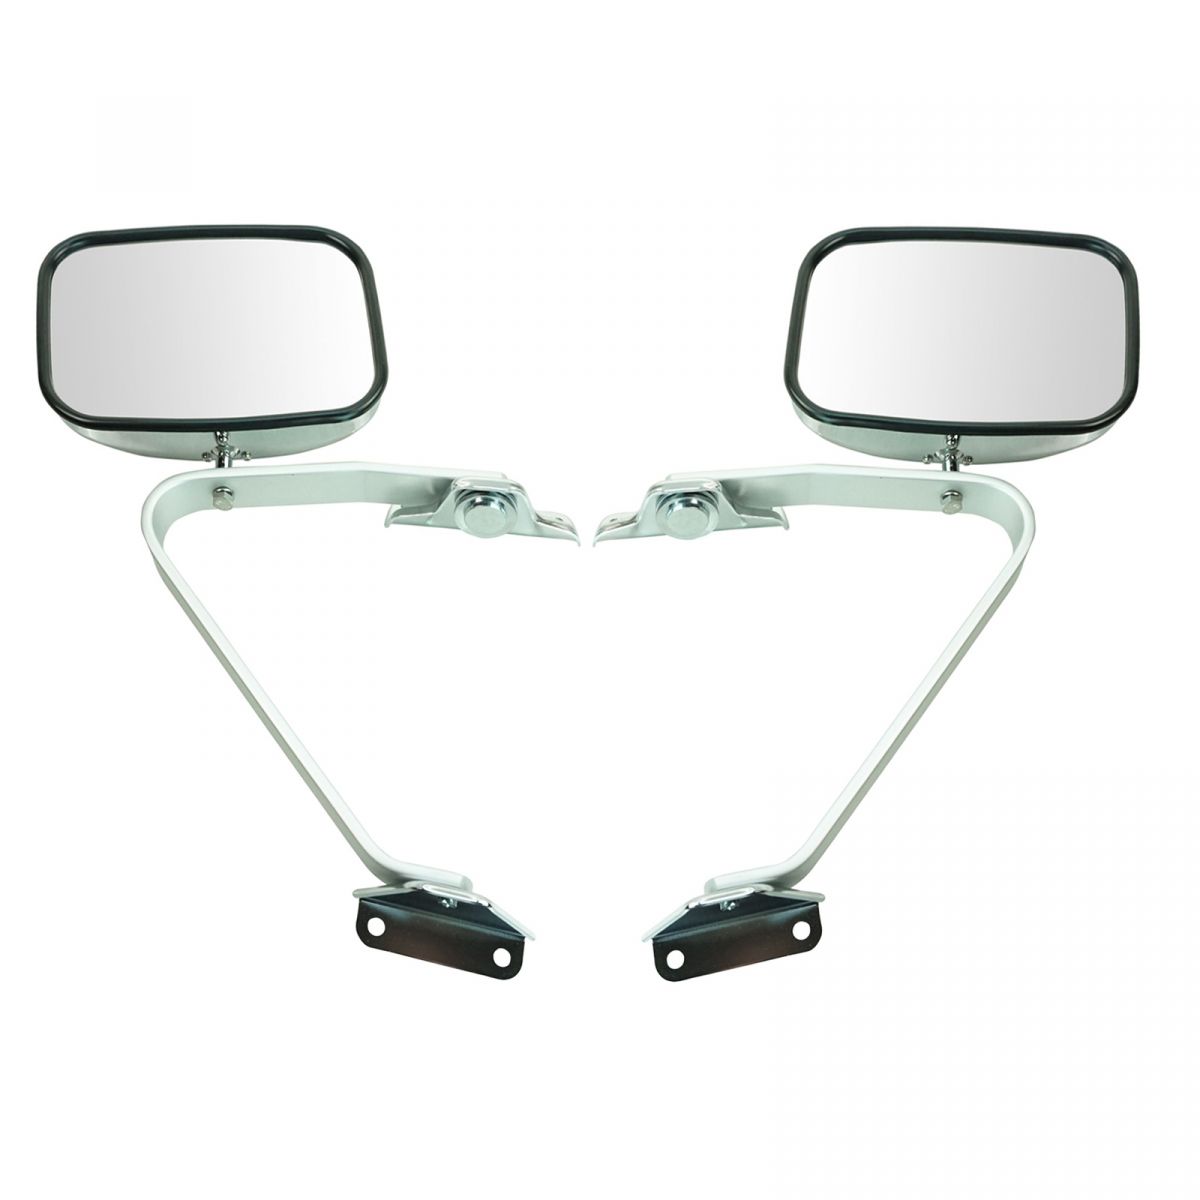 Side View Manual Mirrors Chrome Pair Set for Ford F-Series Pickup Truck